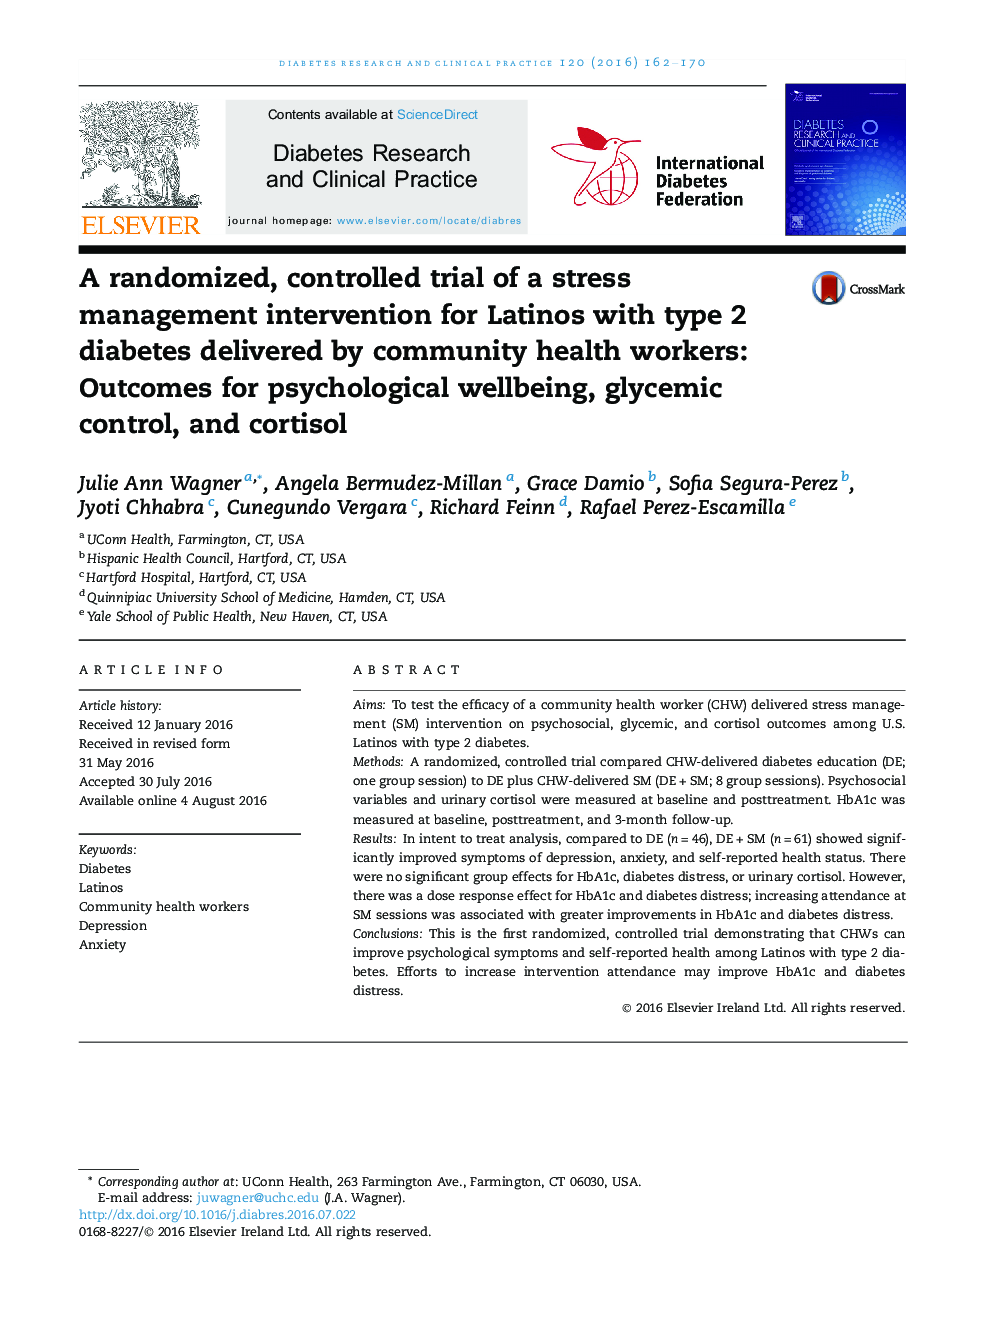 A randomized, controlled trial of a stress management intervention for Latinos with type 2 diabetes delivered by community health workers: Outcomes for psychological wellbeing, glycemic control, and cortisol